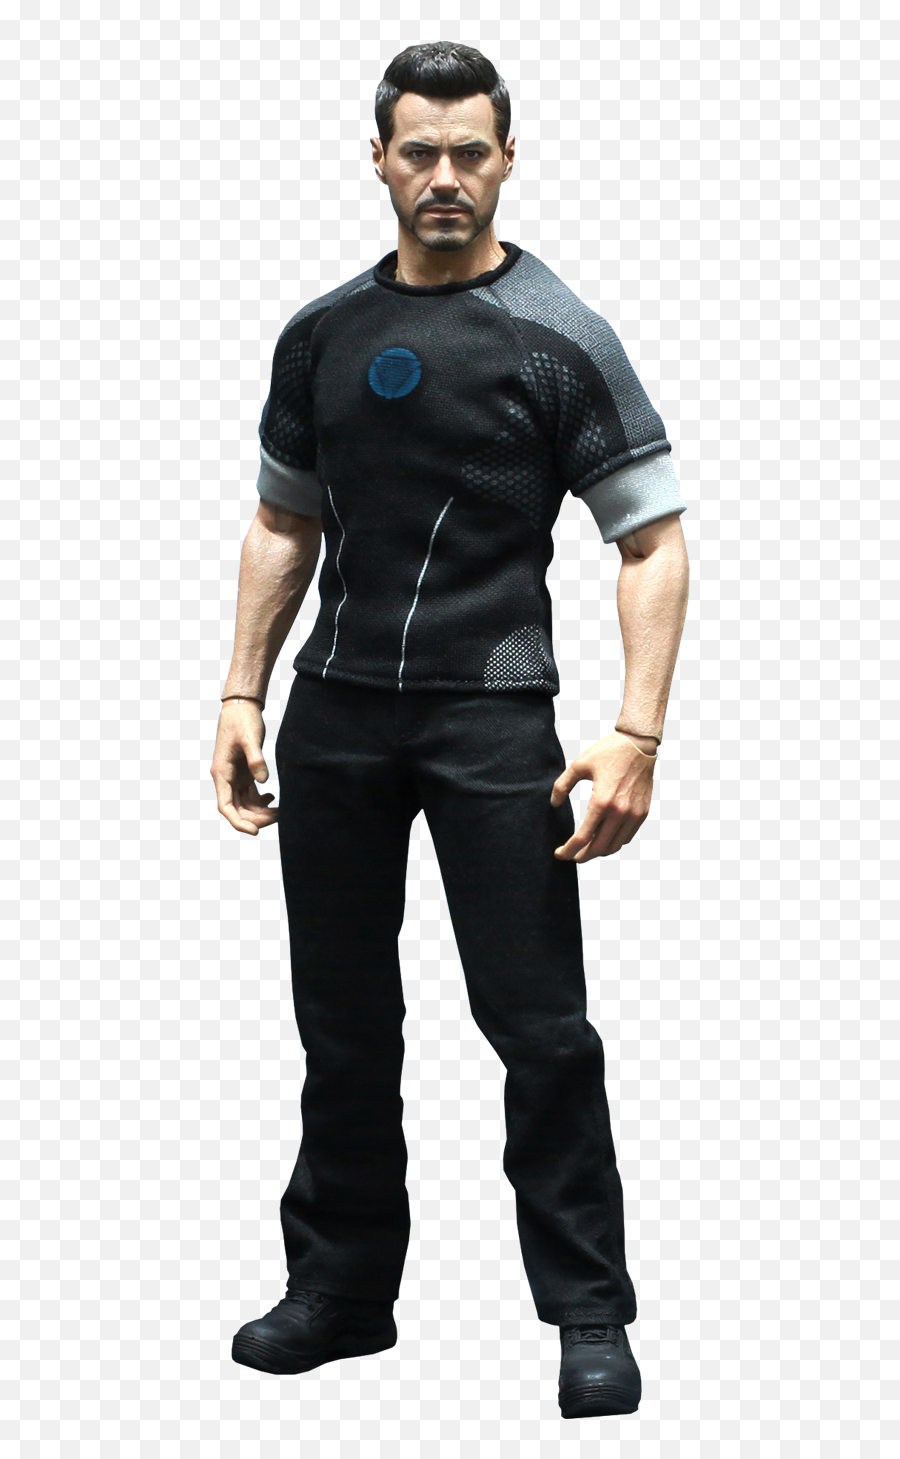 Tony Stark Png Images In - Standing Emoji,Tony Stark Png